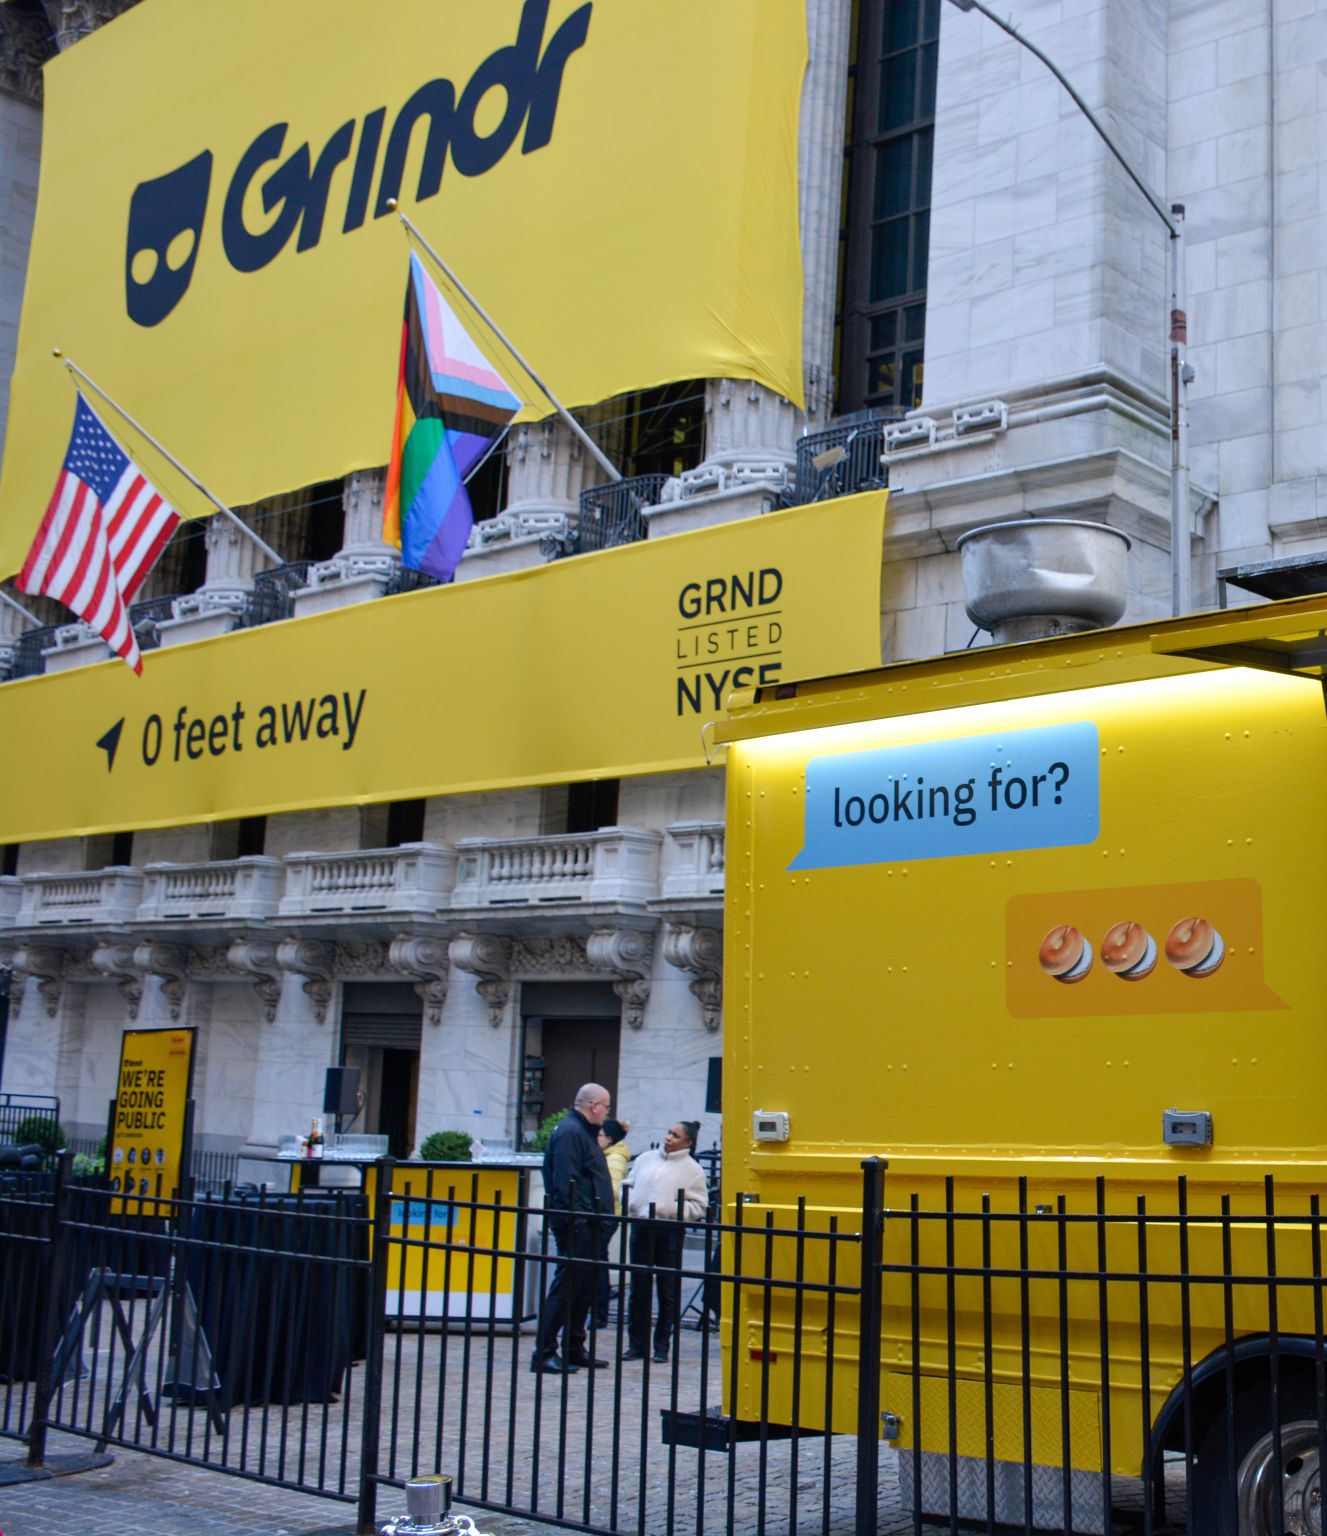 Grindr branded food truck on Wall Street for IPO.